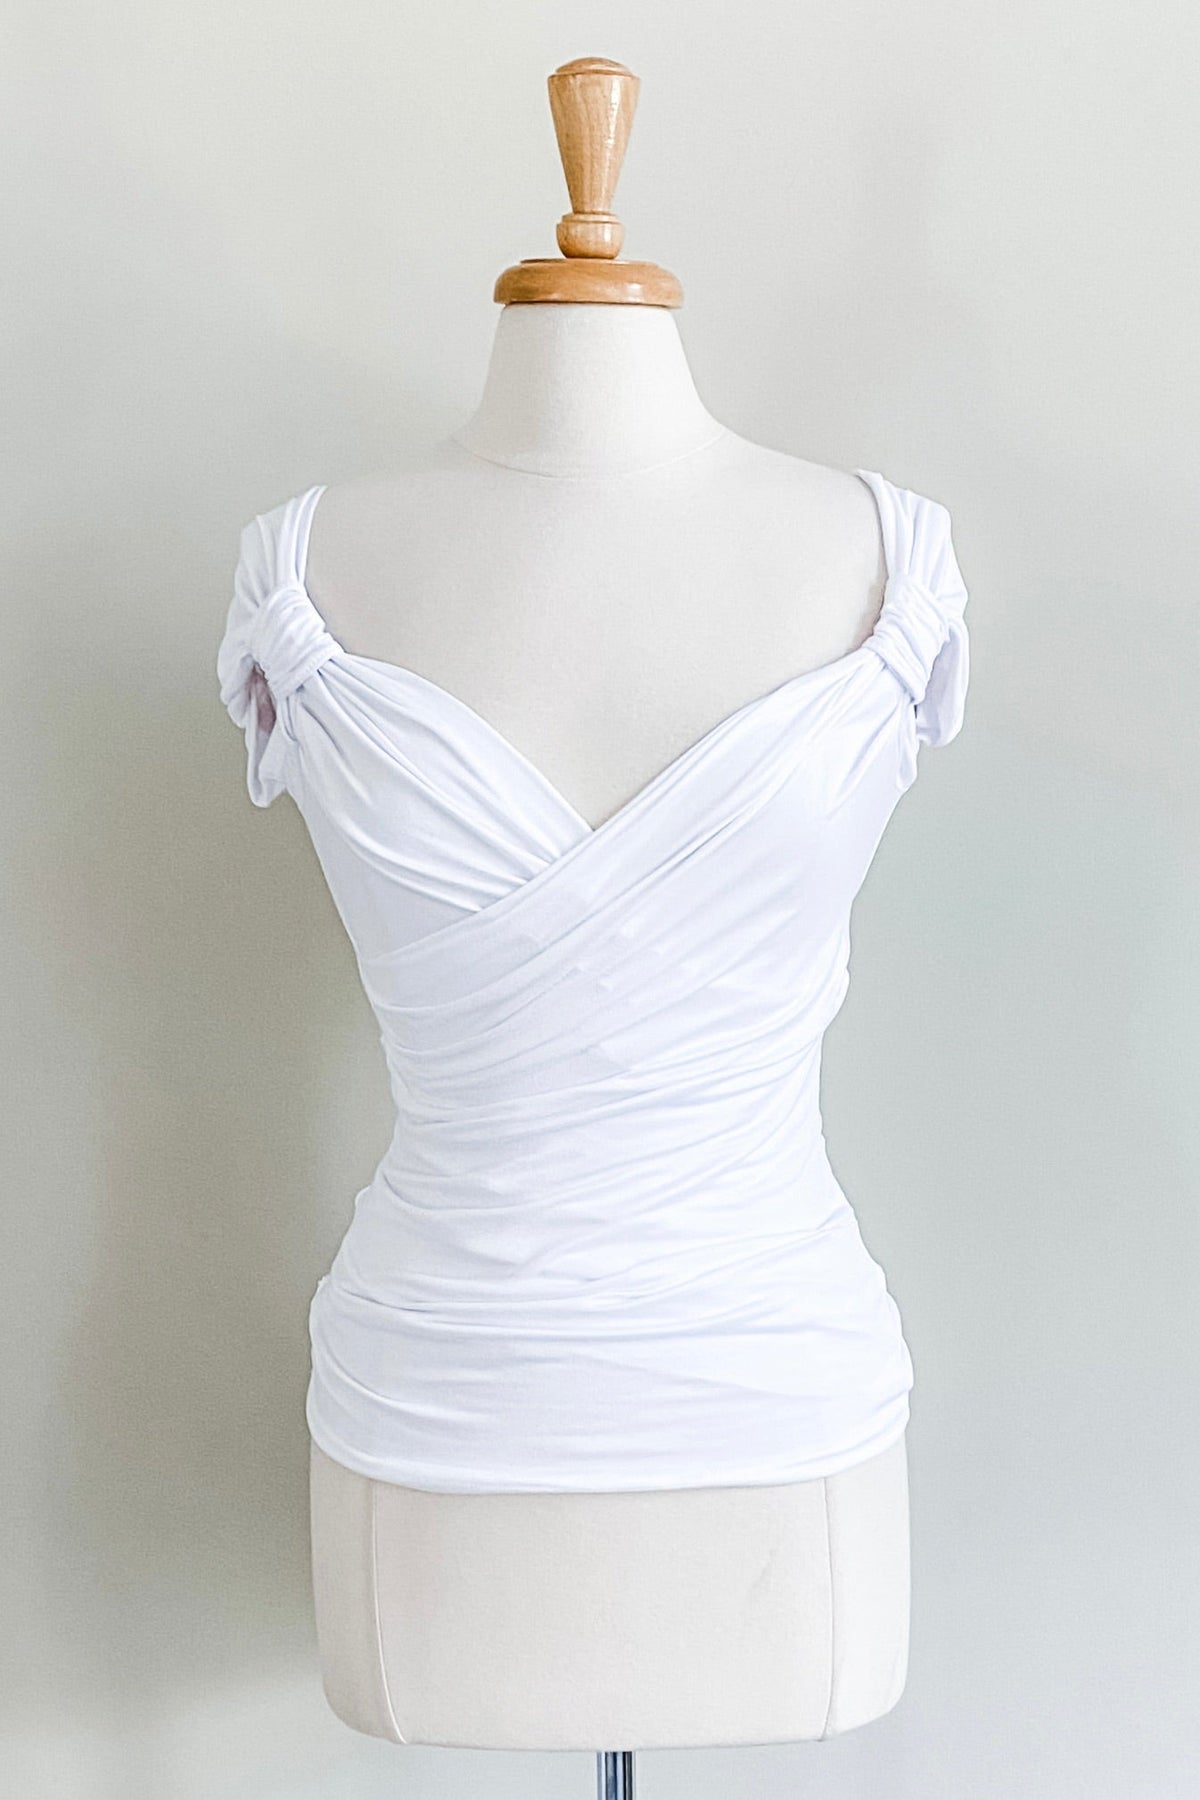 Diane Kroe Cross Top (White) - Warm Weather Capsule Collection